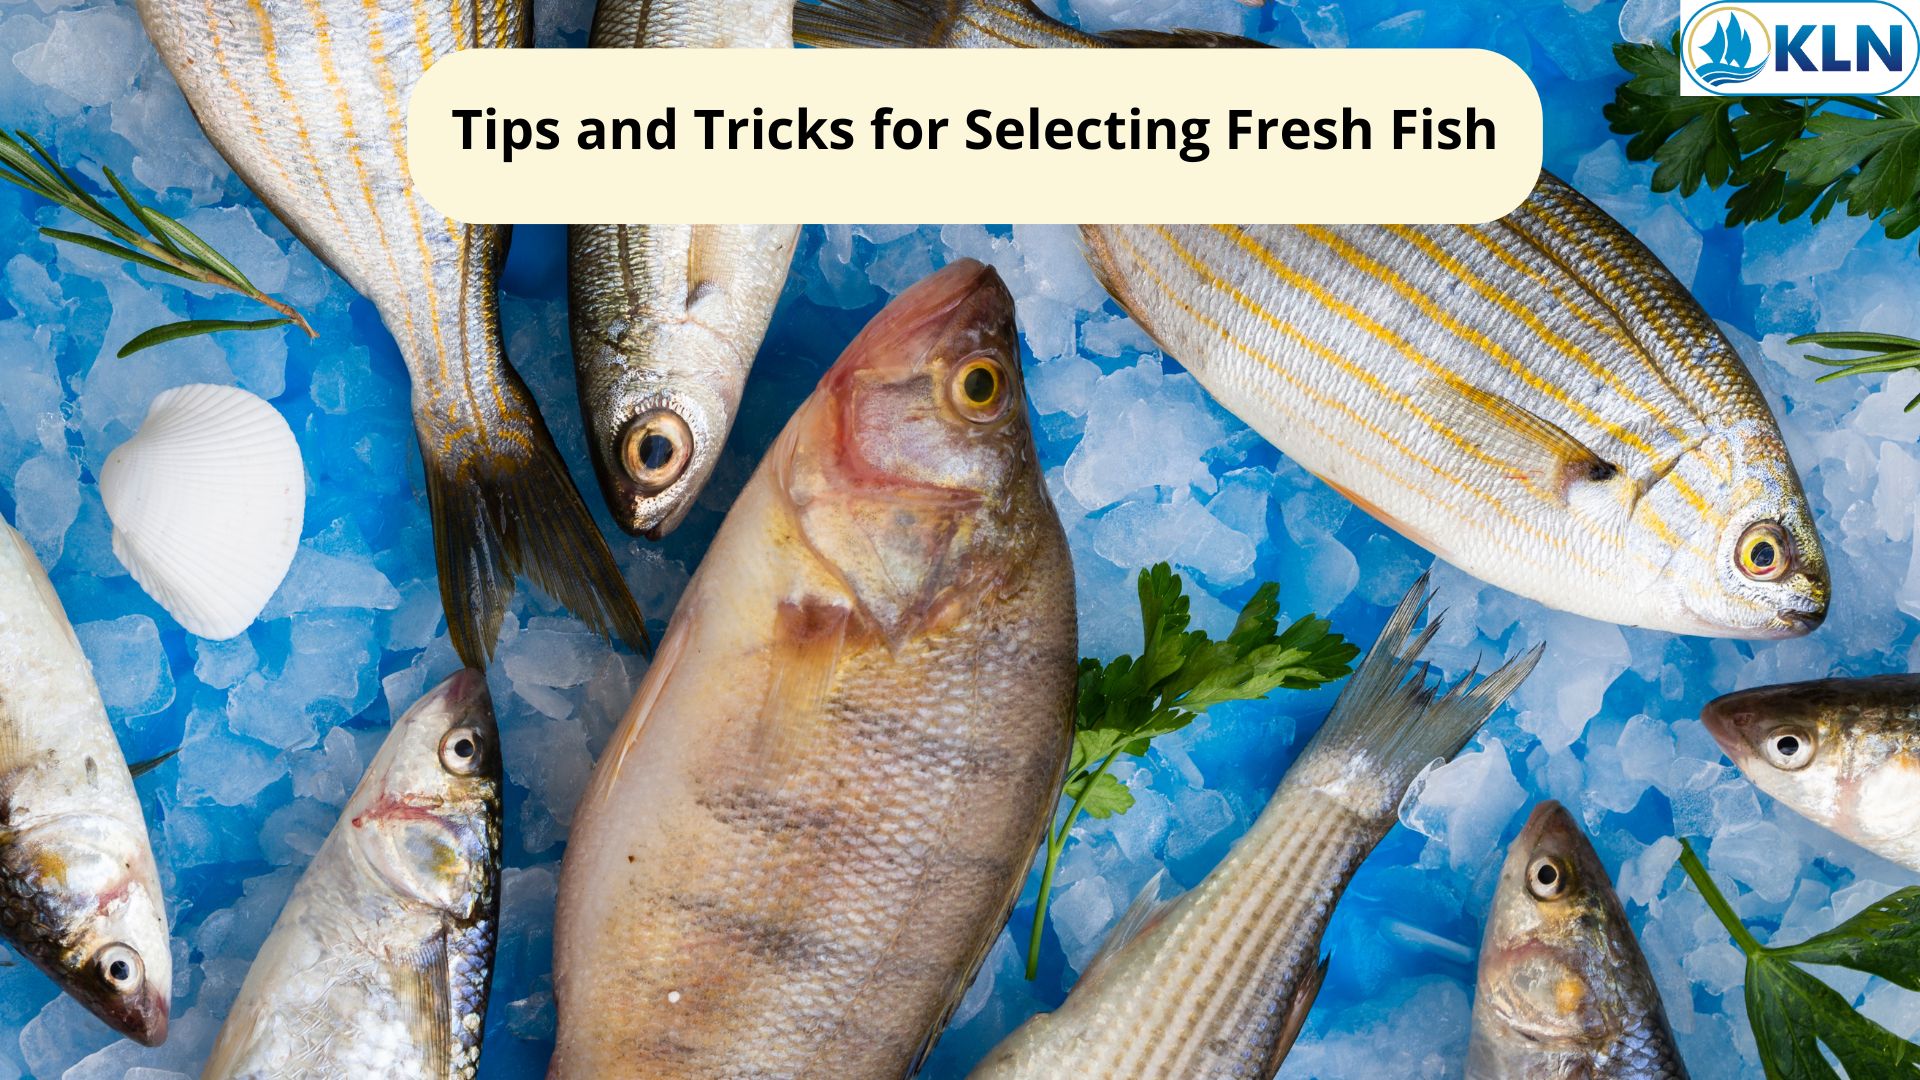 Tips and Tricks for Selecting Fresh Fish